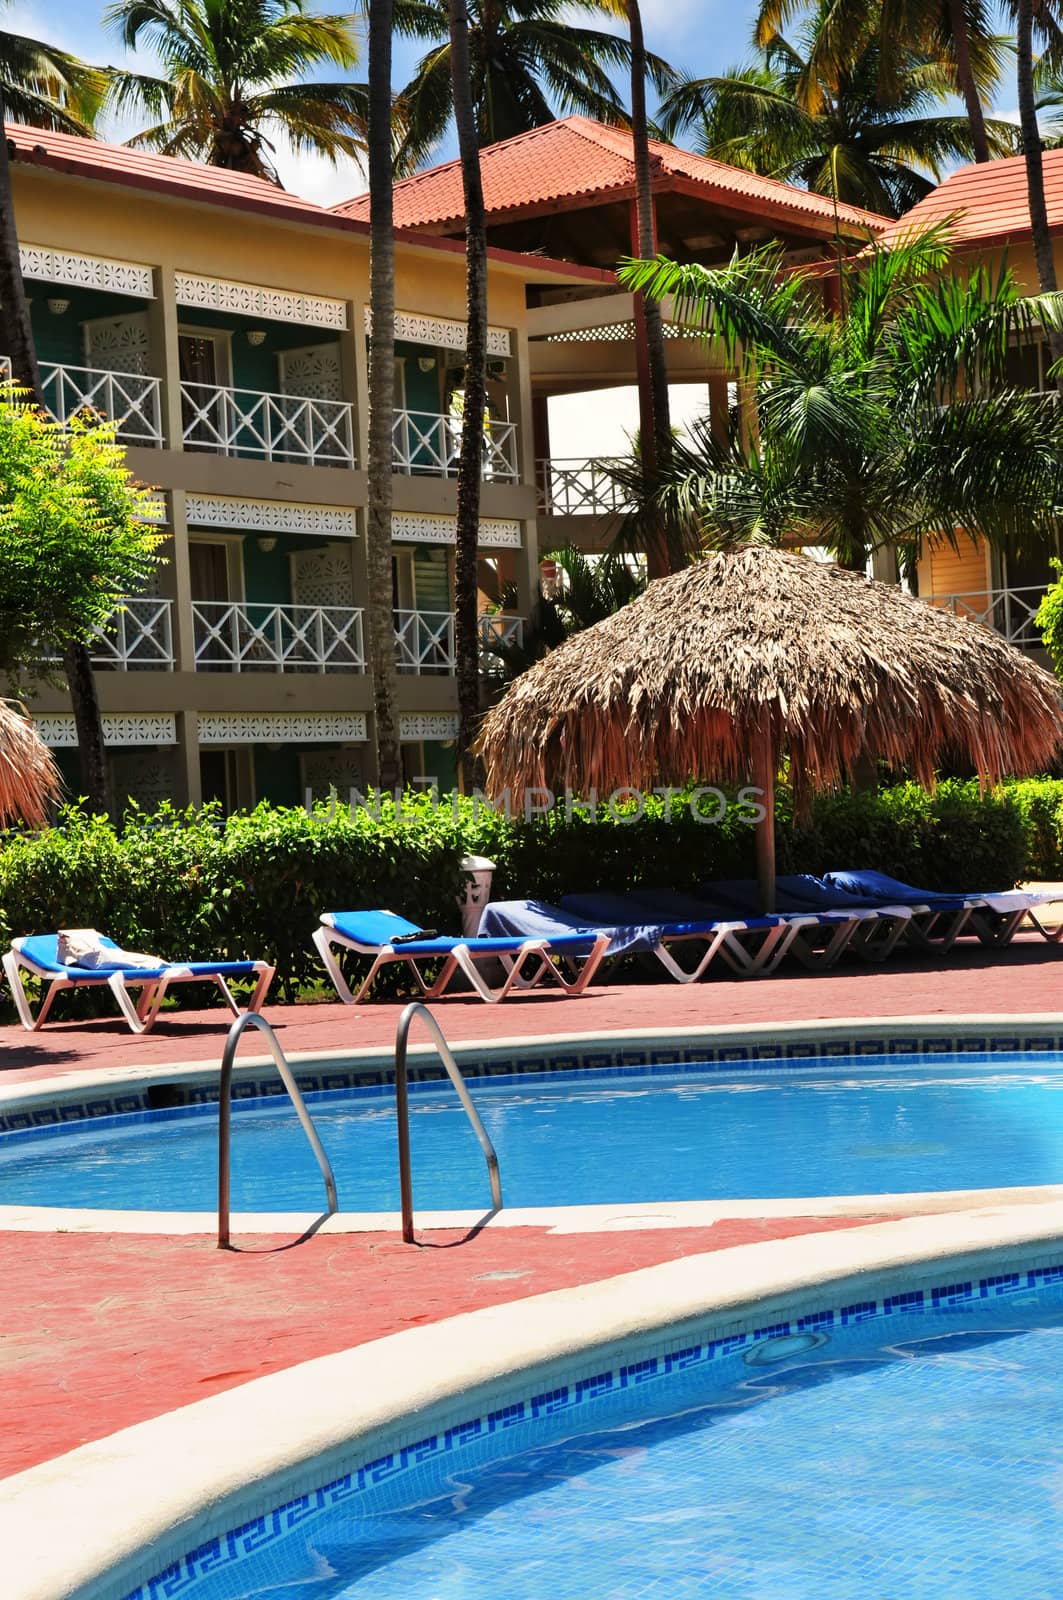 Swimming pool and hotel with palm trees at tropical resort